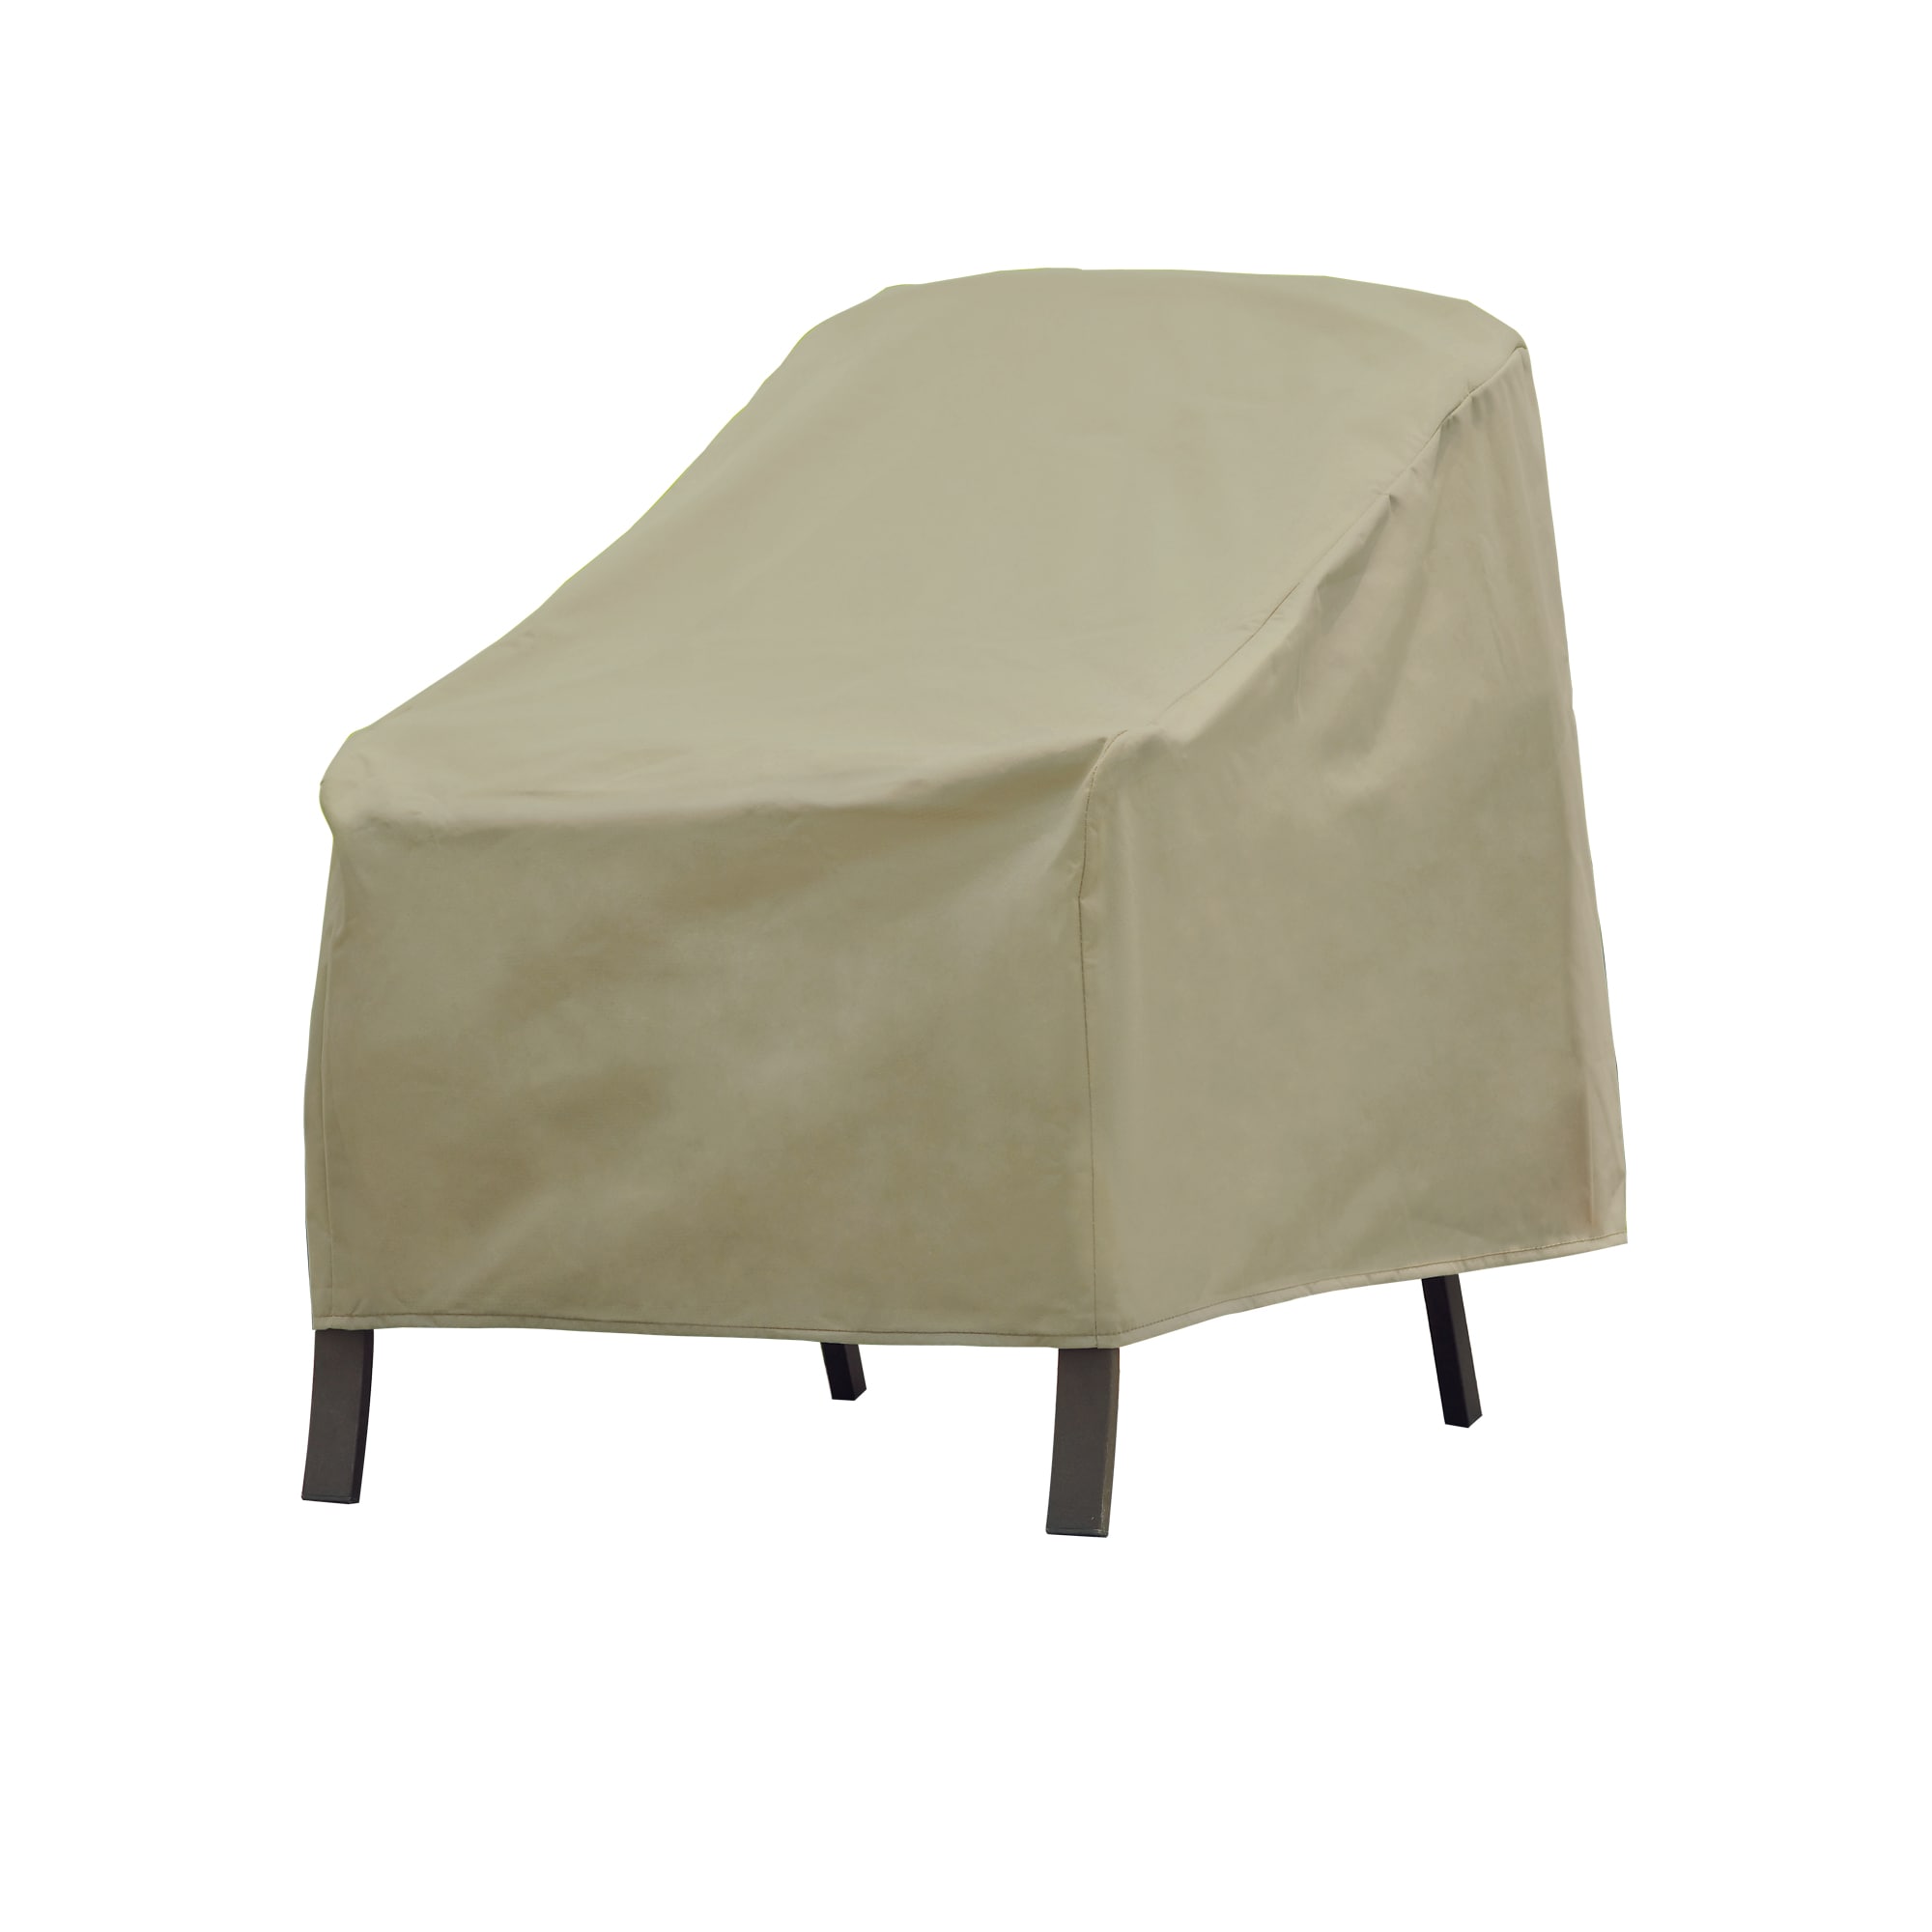 Beige High Back Patio Rattan Chair Seat Furniture Waterproof Cover Protection US 